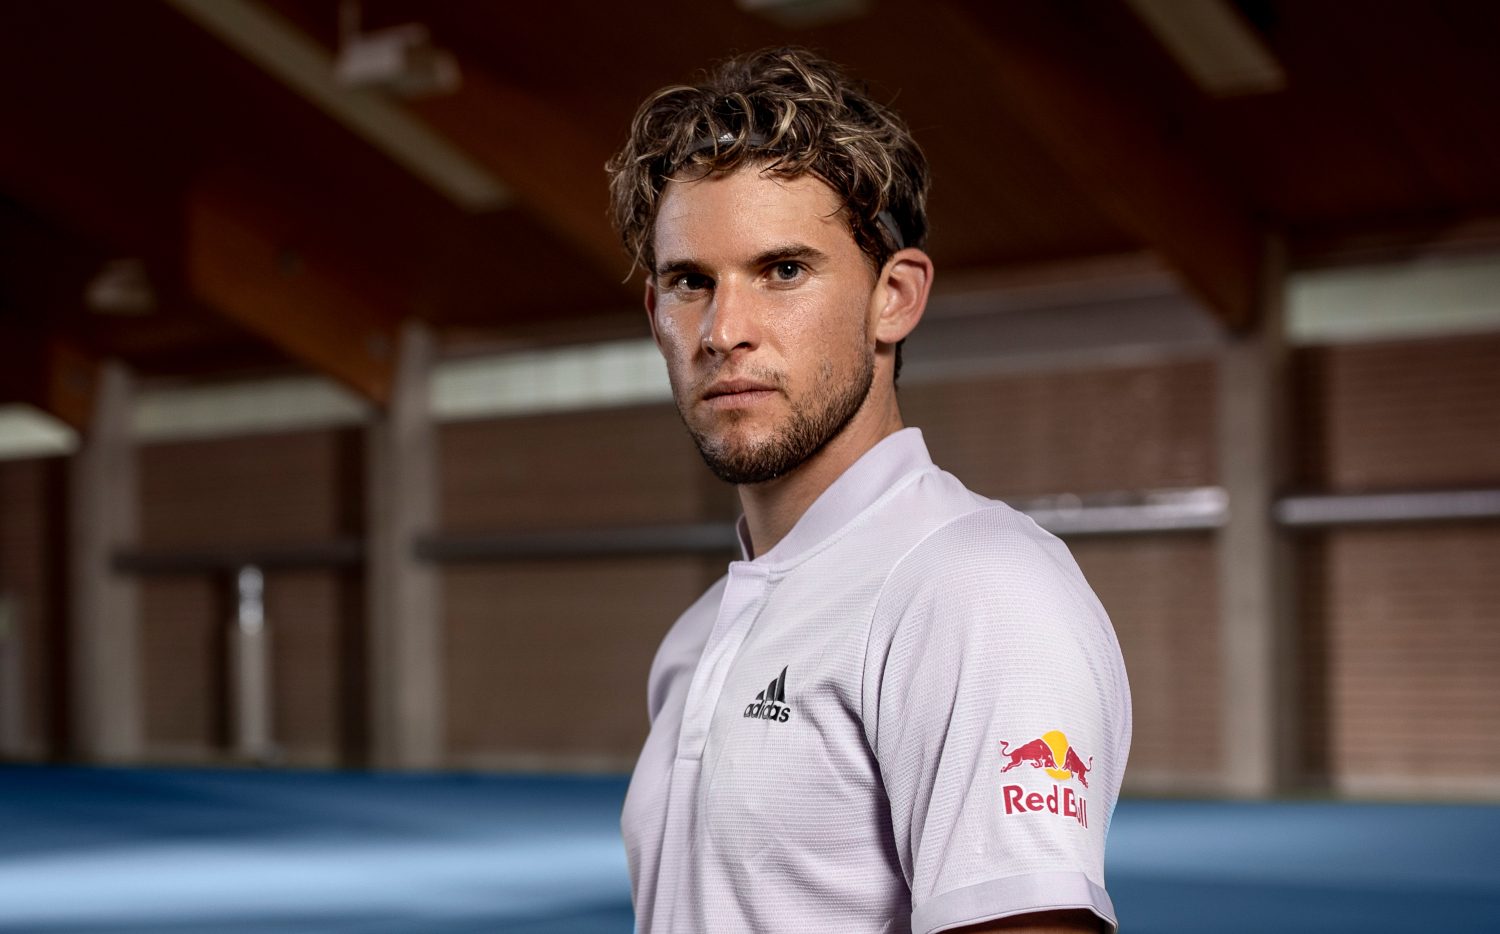 Dominic Thiem of Austria poses for a portrait in Baden, Austria on June 29, 2020 // Samo Vidic/Red Bull Content Pool // SI202007020076 // Usage for editorial use only //